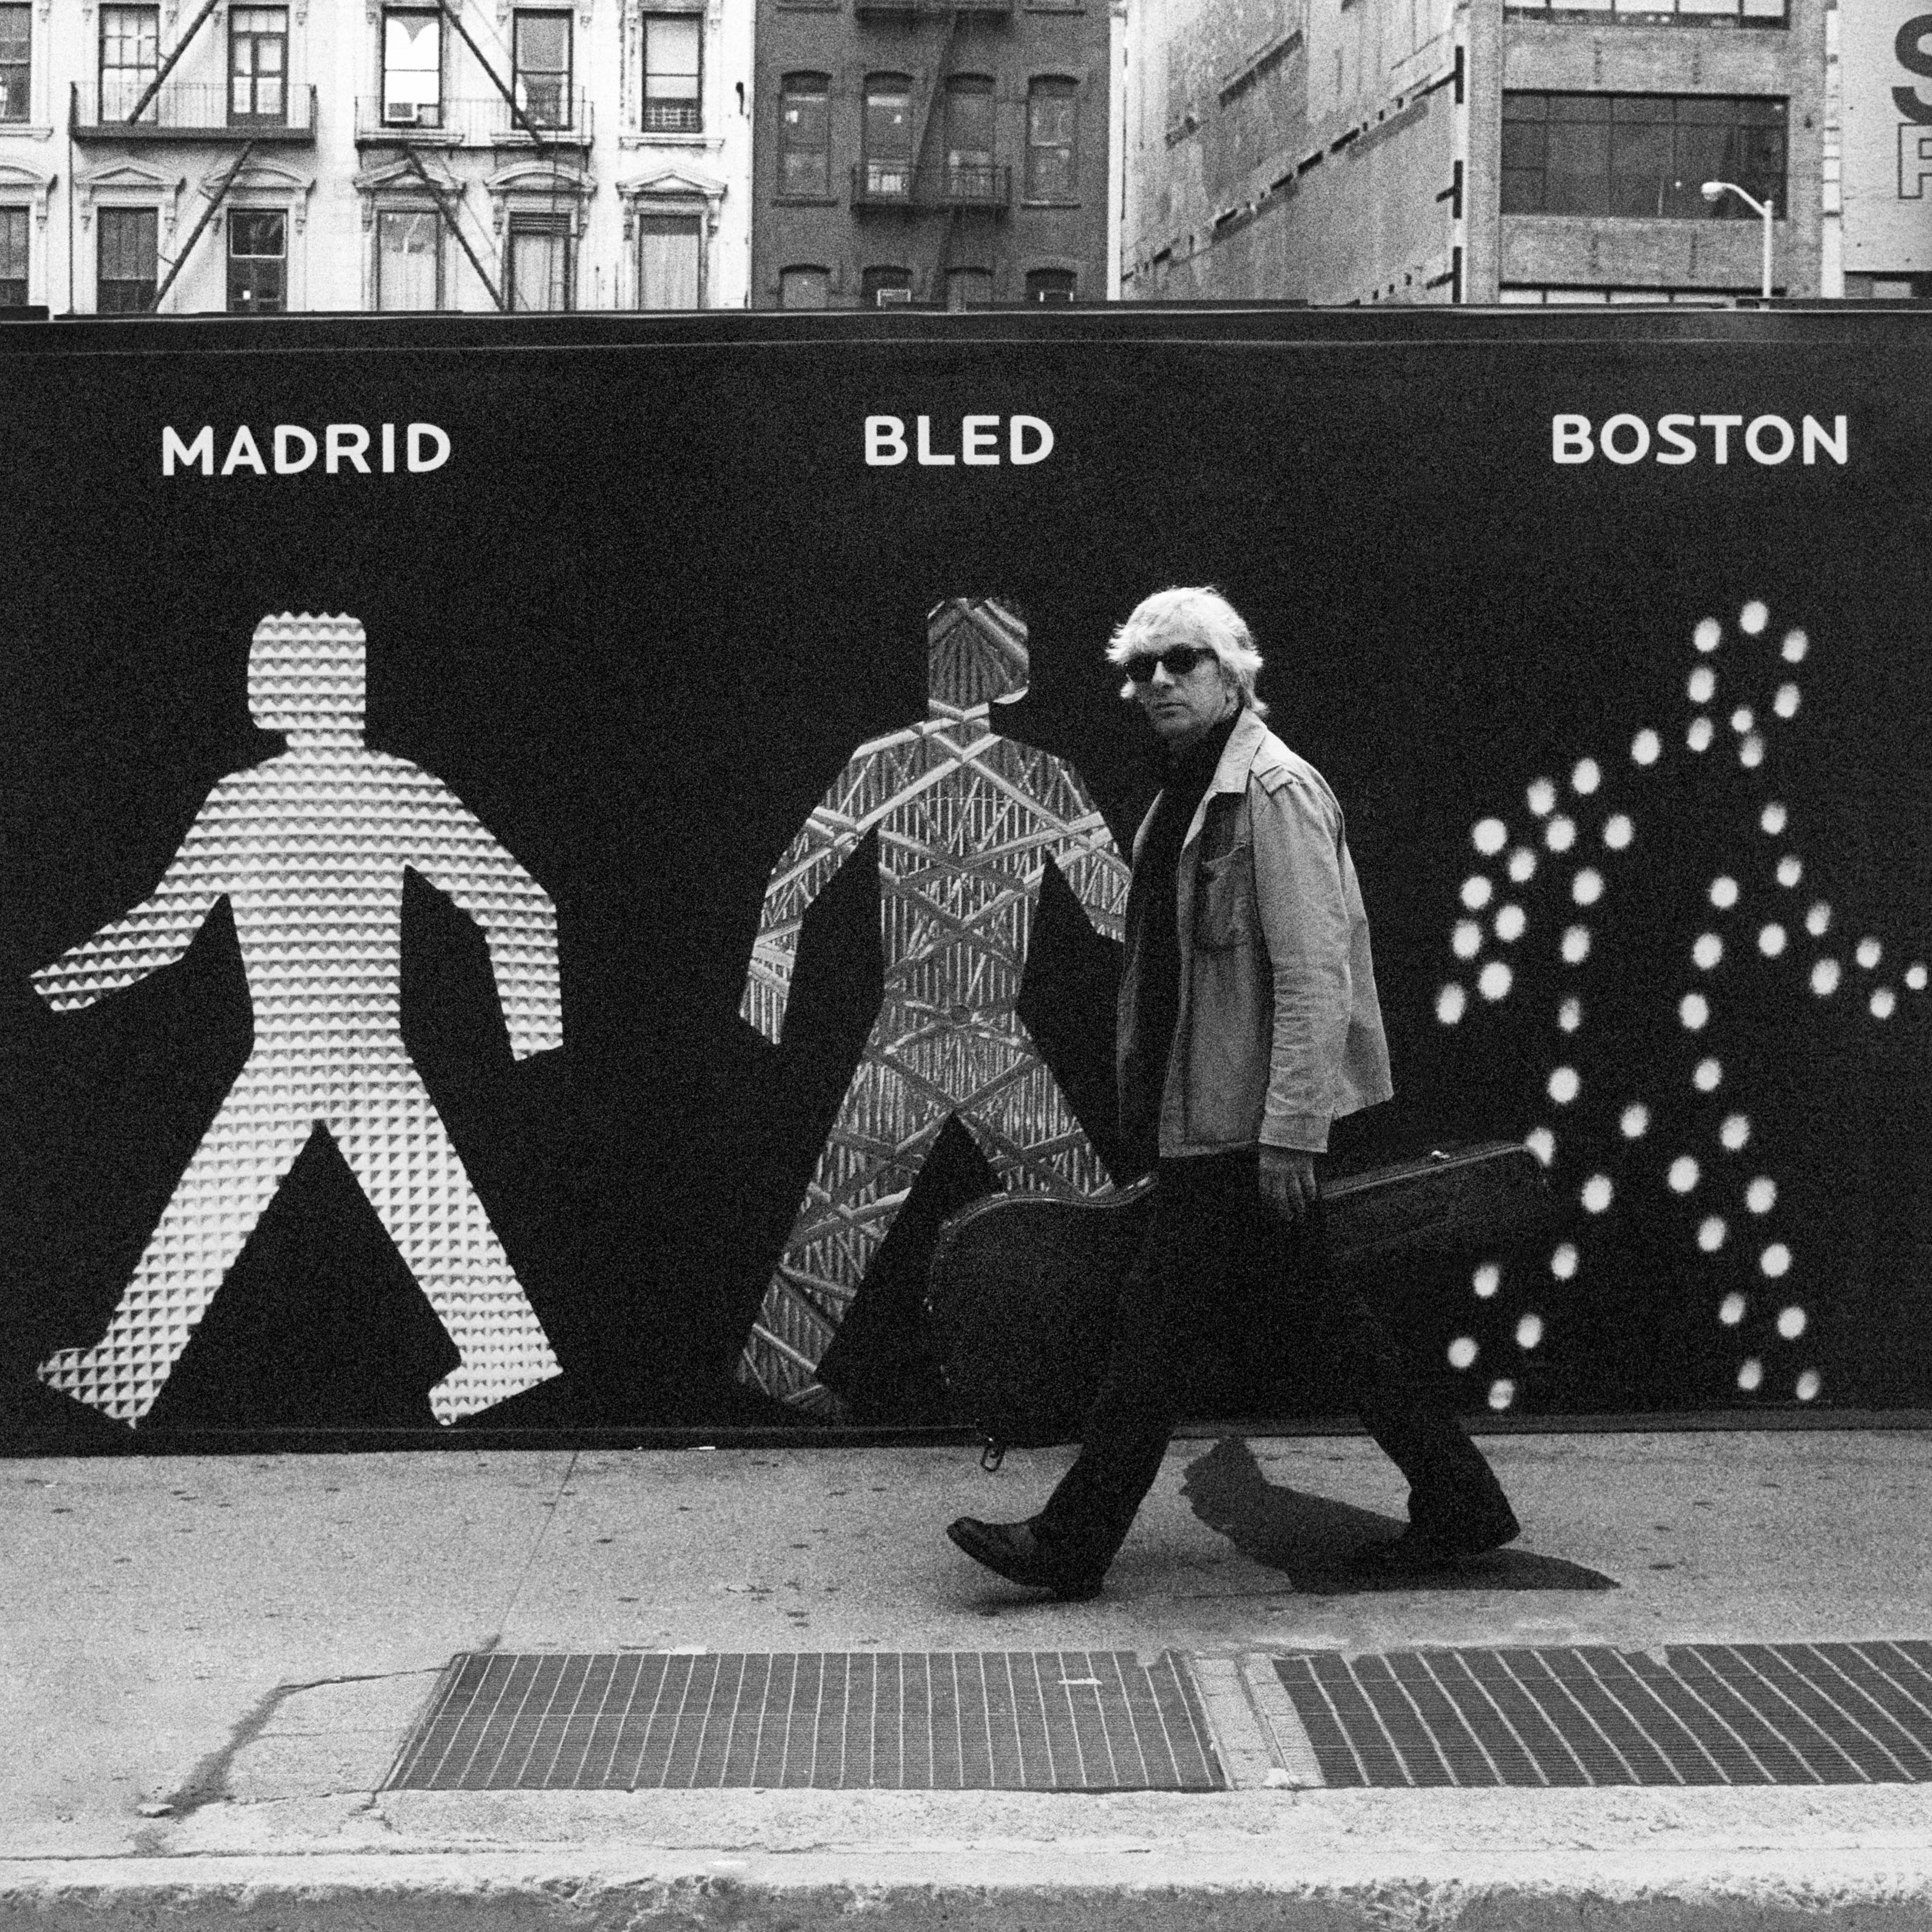 A black-and-white photo depicts a figure carrying a guitar case, against a background depicting pedestrian traffic sign outlines